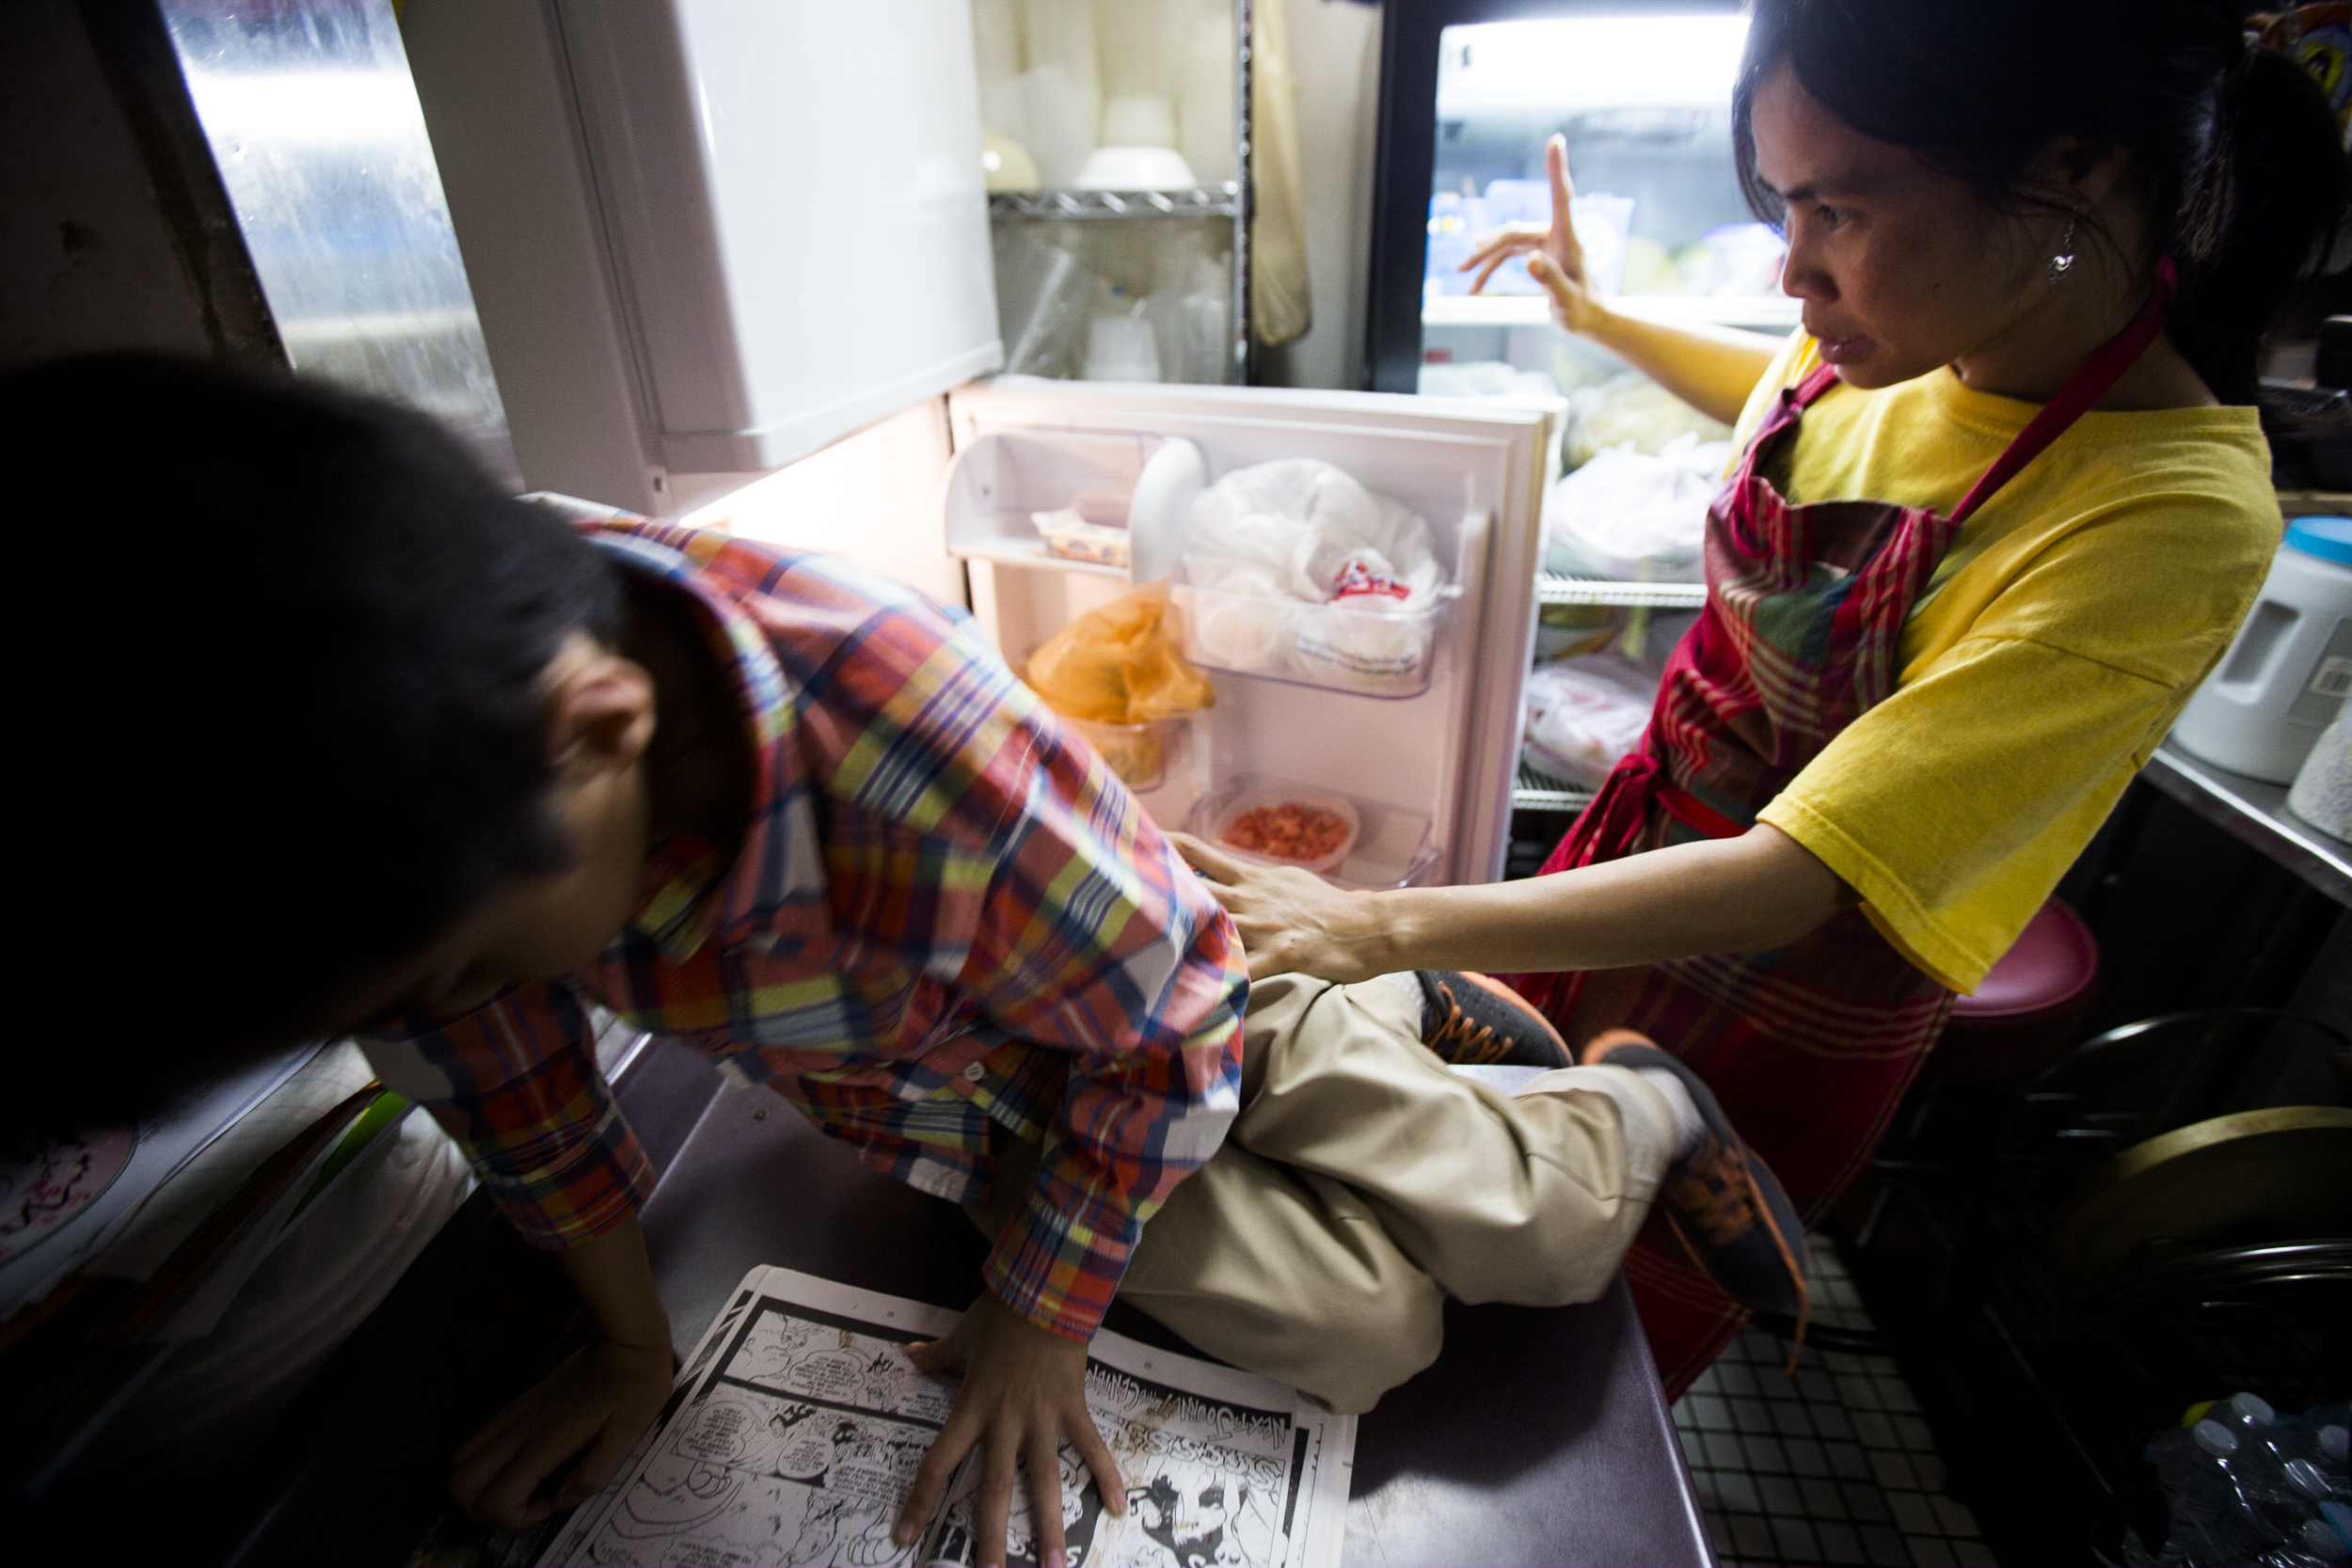  Thawdar Kway (R) collecting food from the fridge while talking to her son, Henry Kway (L). By Ann Wang 